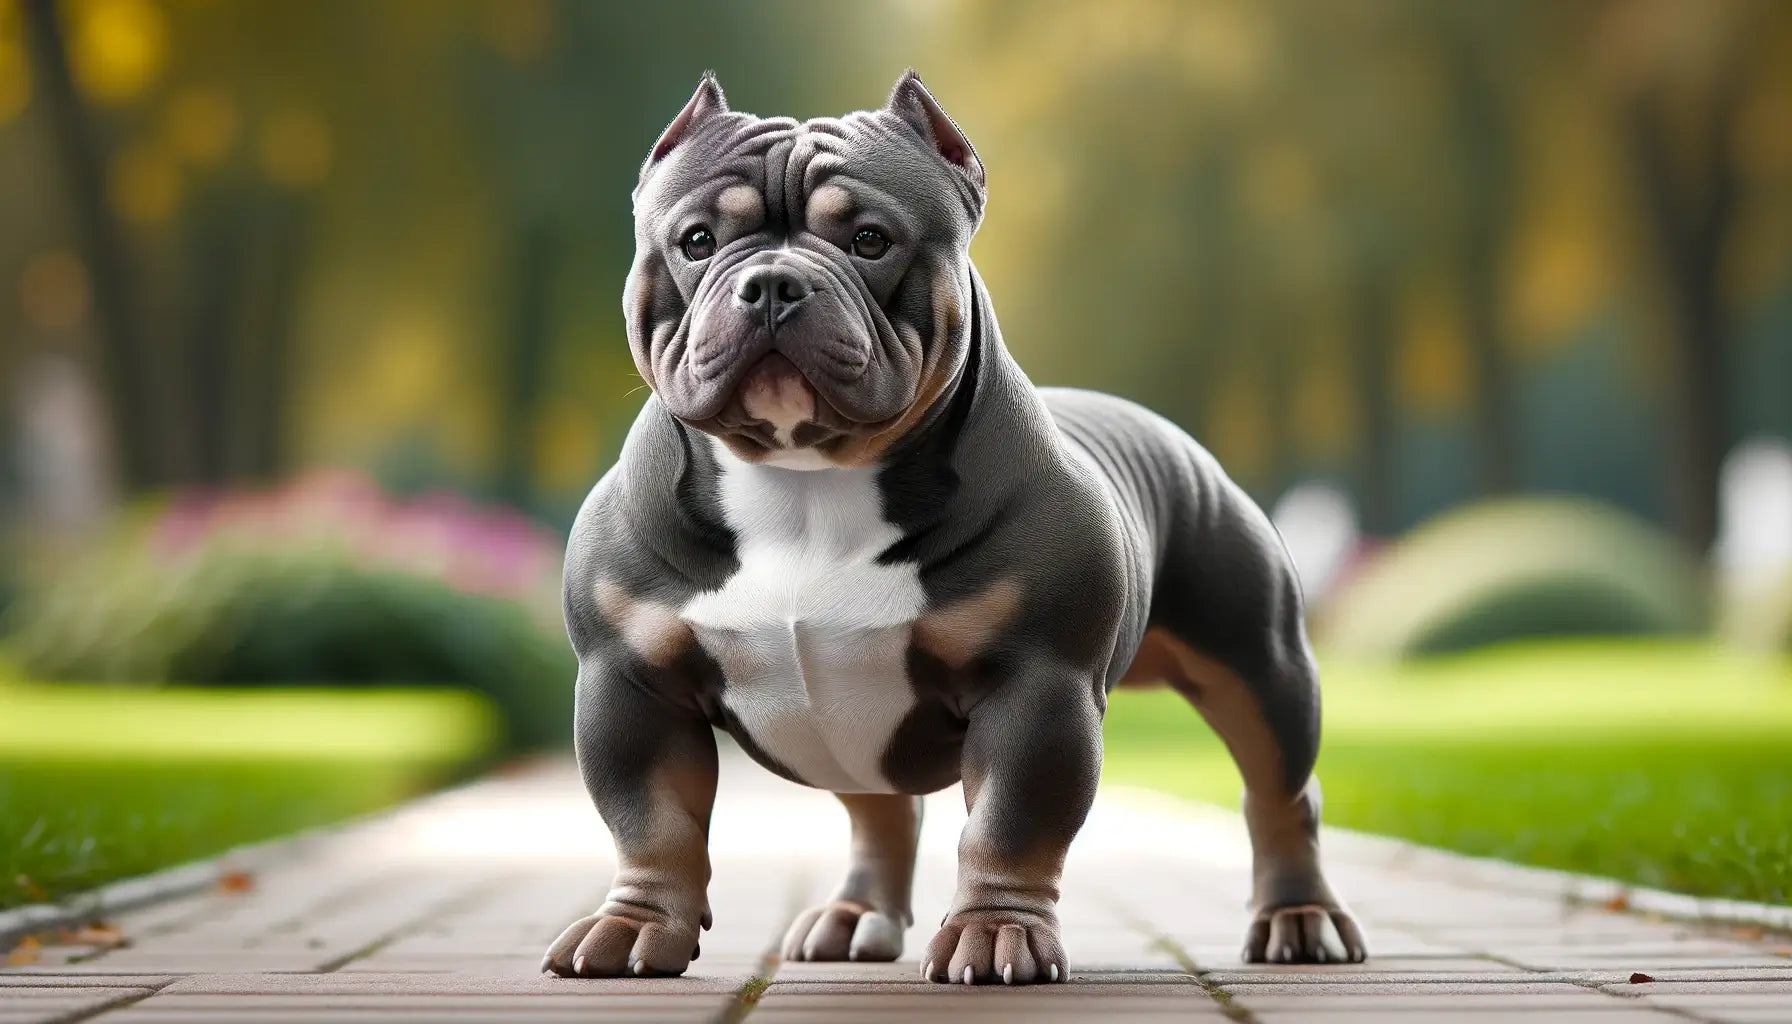 Micro Bully with a broad chest and well-defined musculature noticeably lower to the ground compared to other Bully breeds